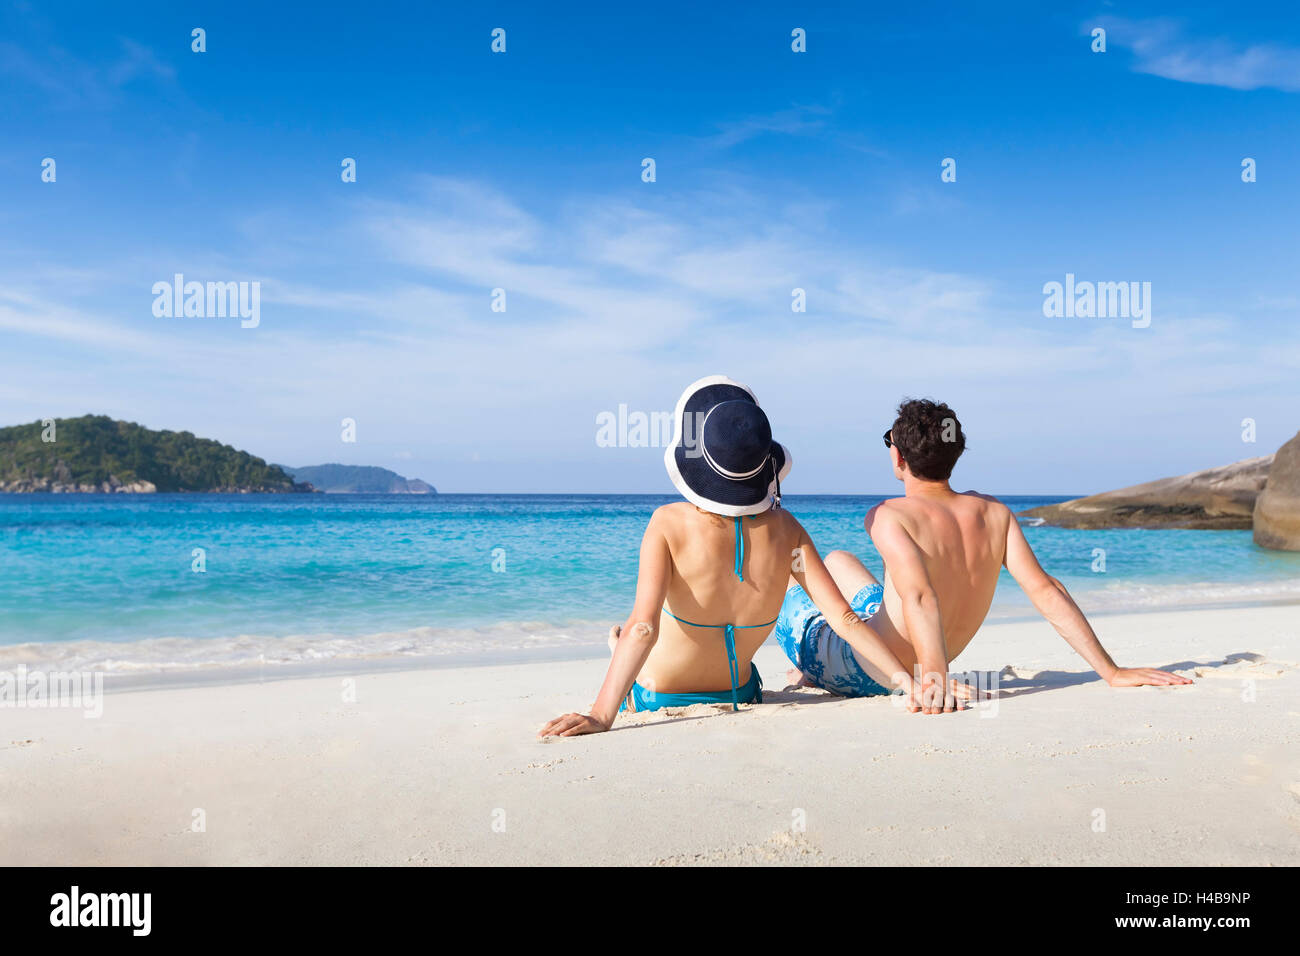 Happy young couple sitting together on paradise beach with clear turquoise sea water Stock Photo